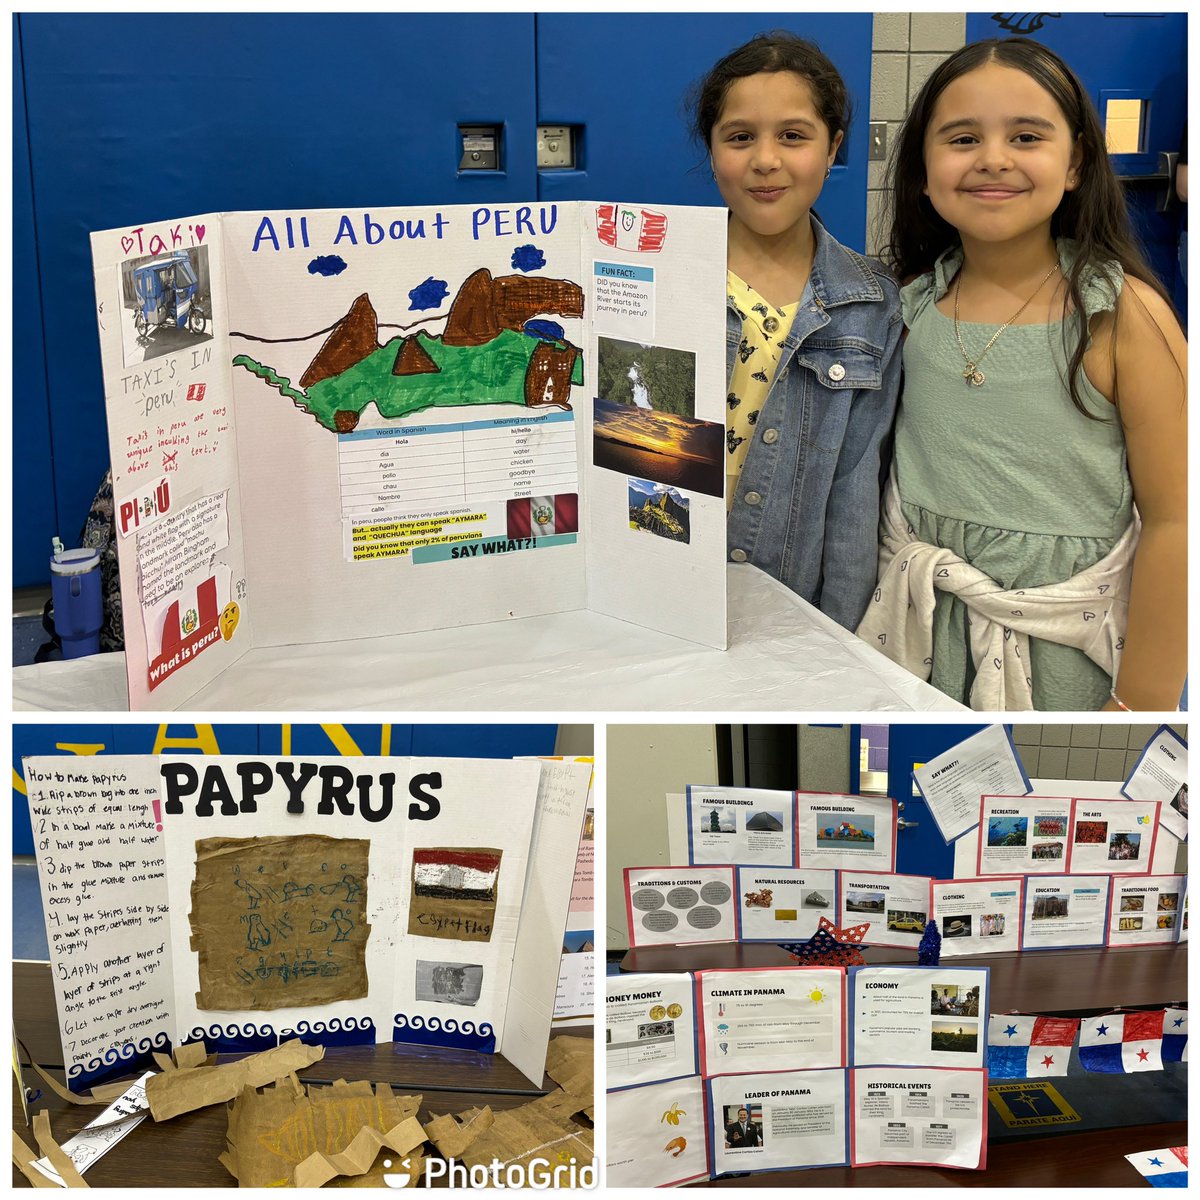 Had a great time learning about different countries at @DoneganBASD Multicultural Leadership Night last night! @basdjacksilva @Leesonscience @Efontanez3